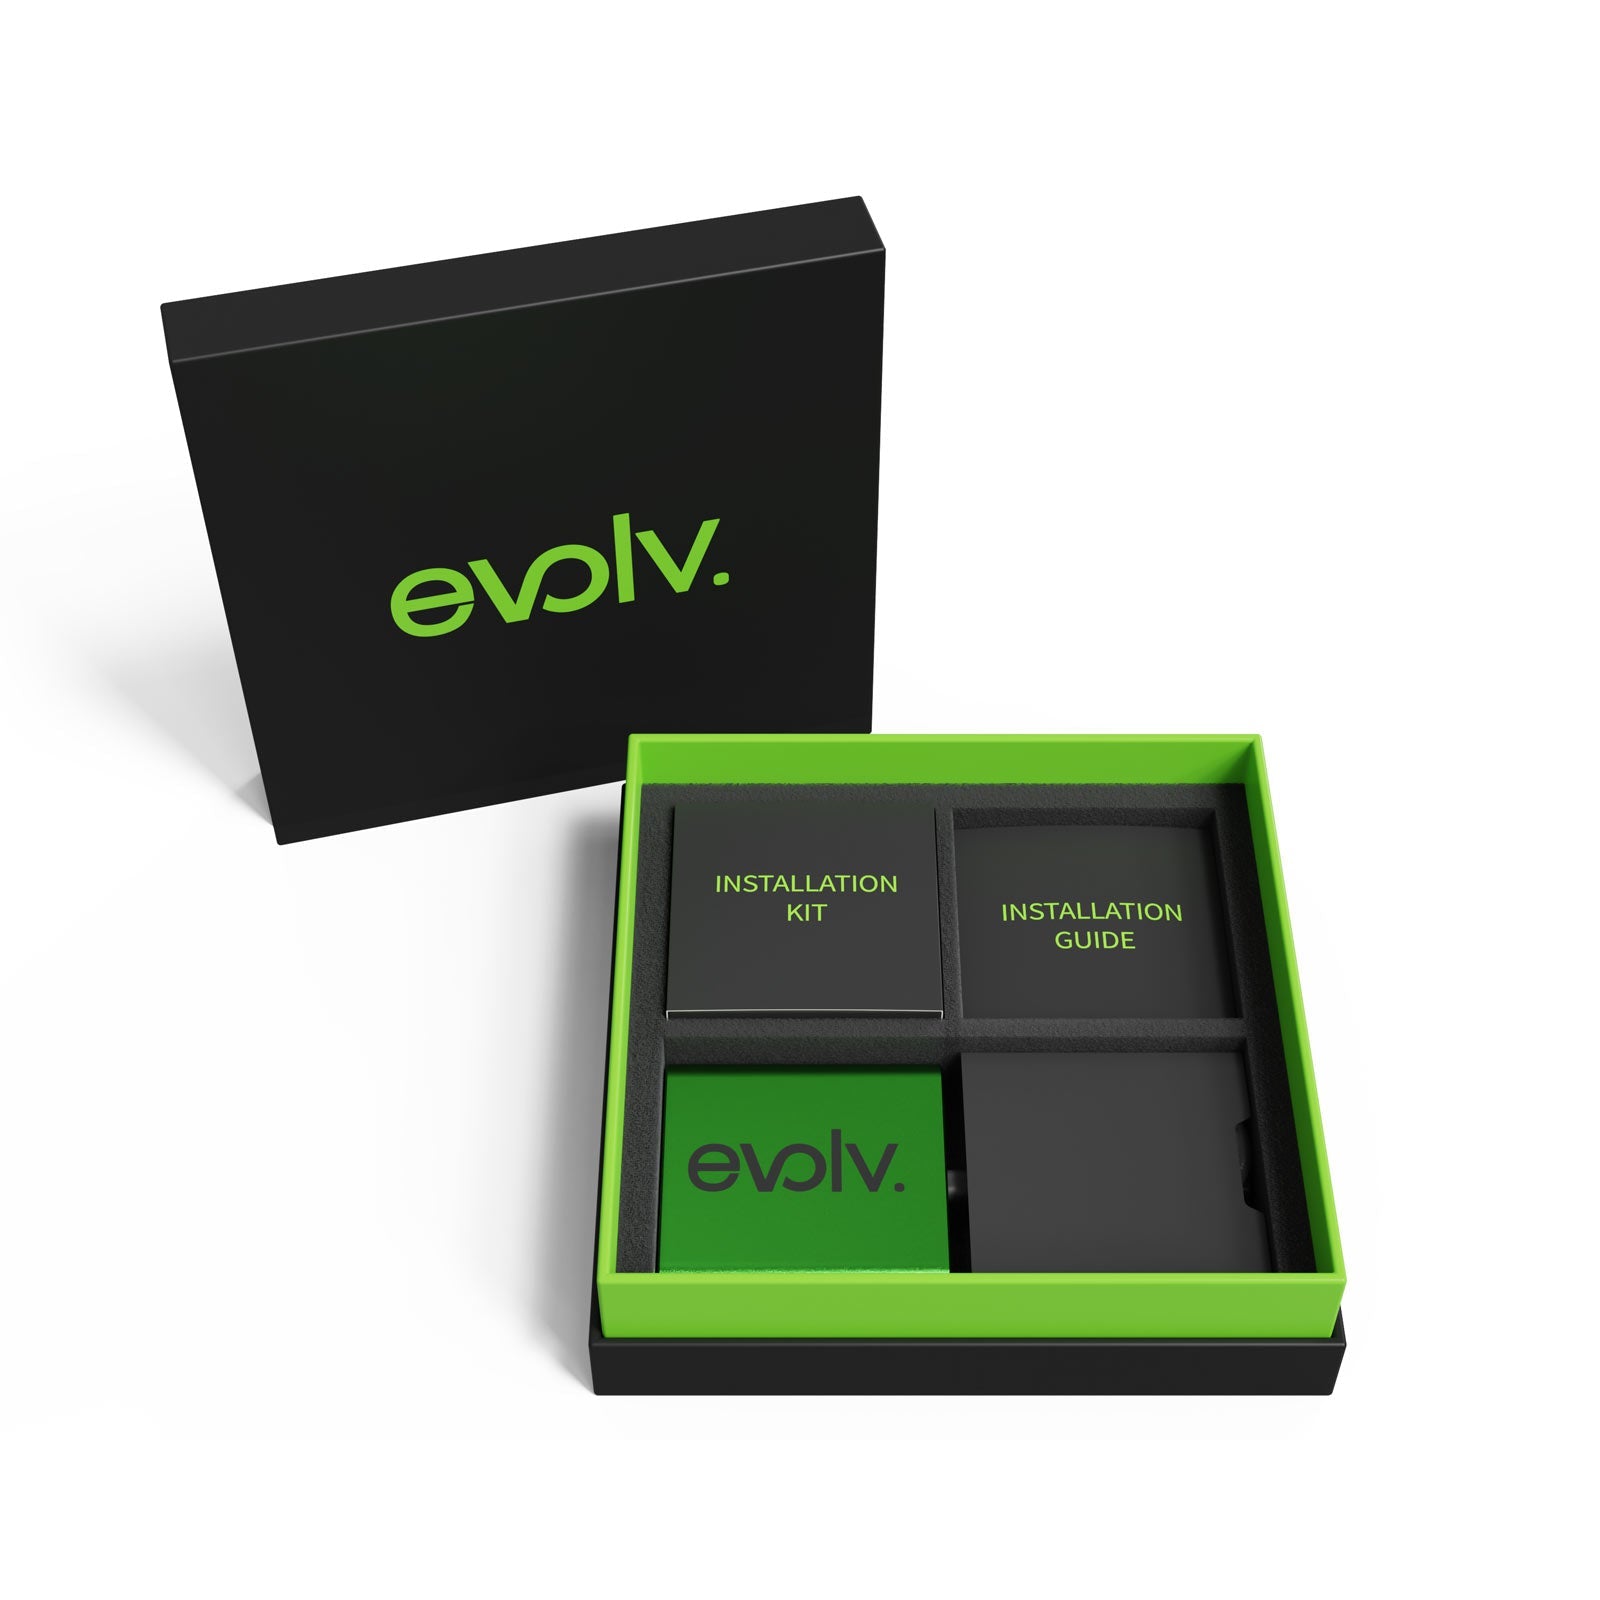 Increase your fuel mileage, performance and throttle response with an Evolv Scion iQ Performance Chip!